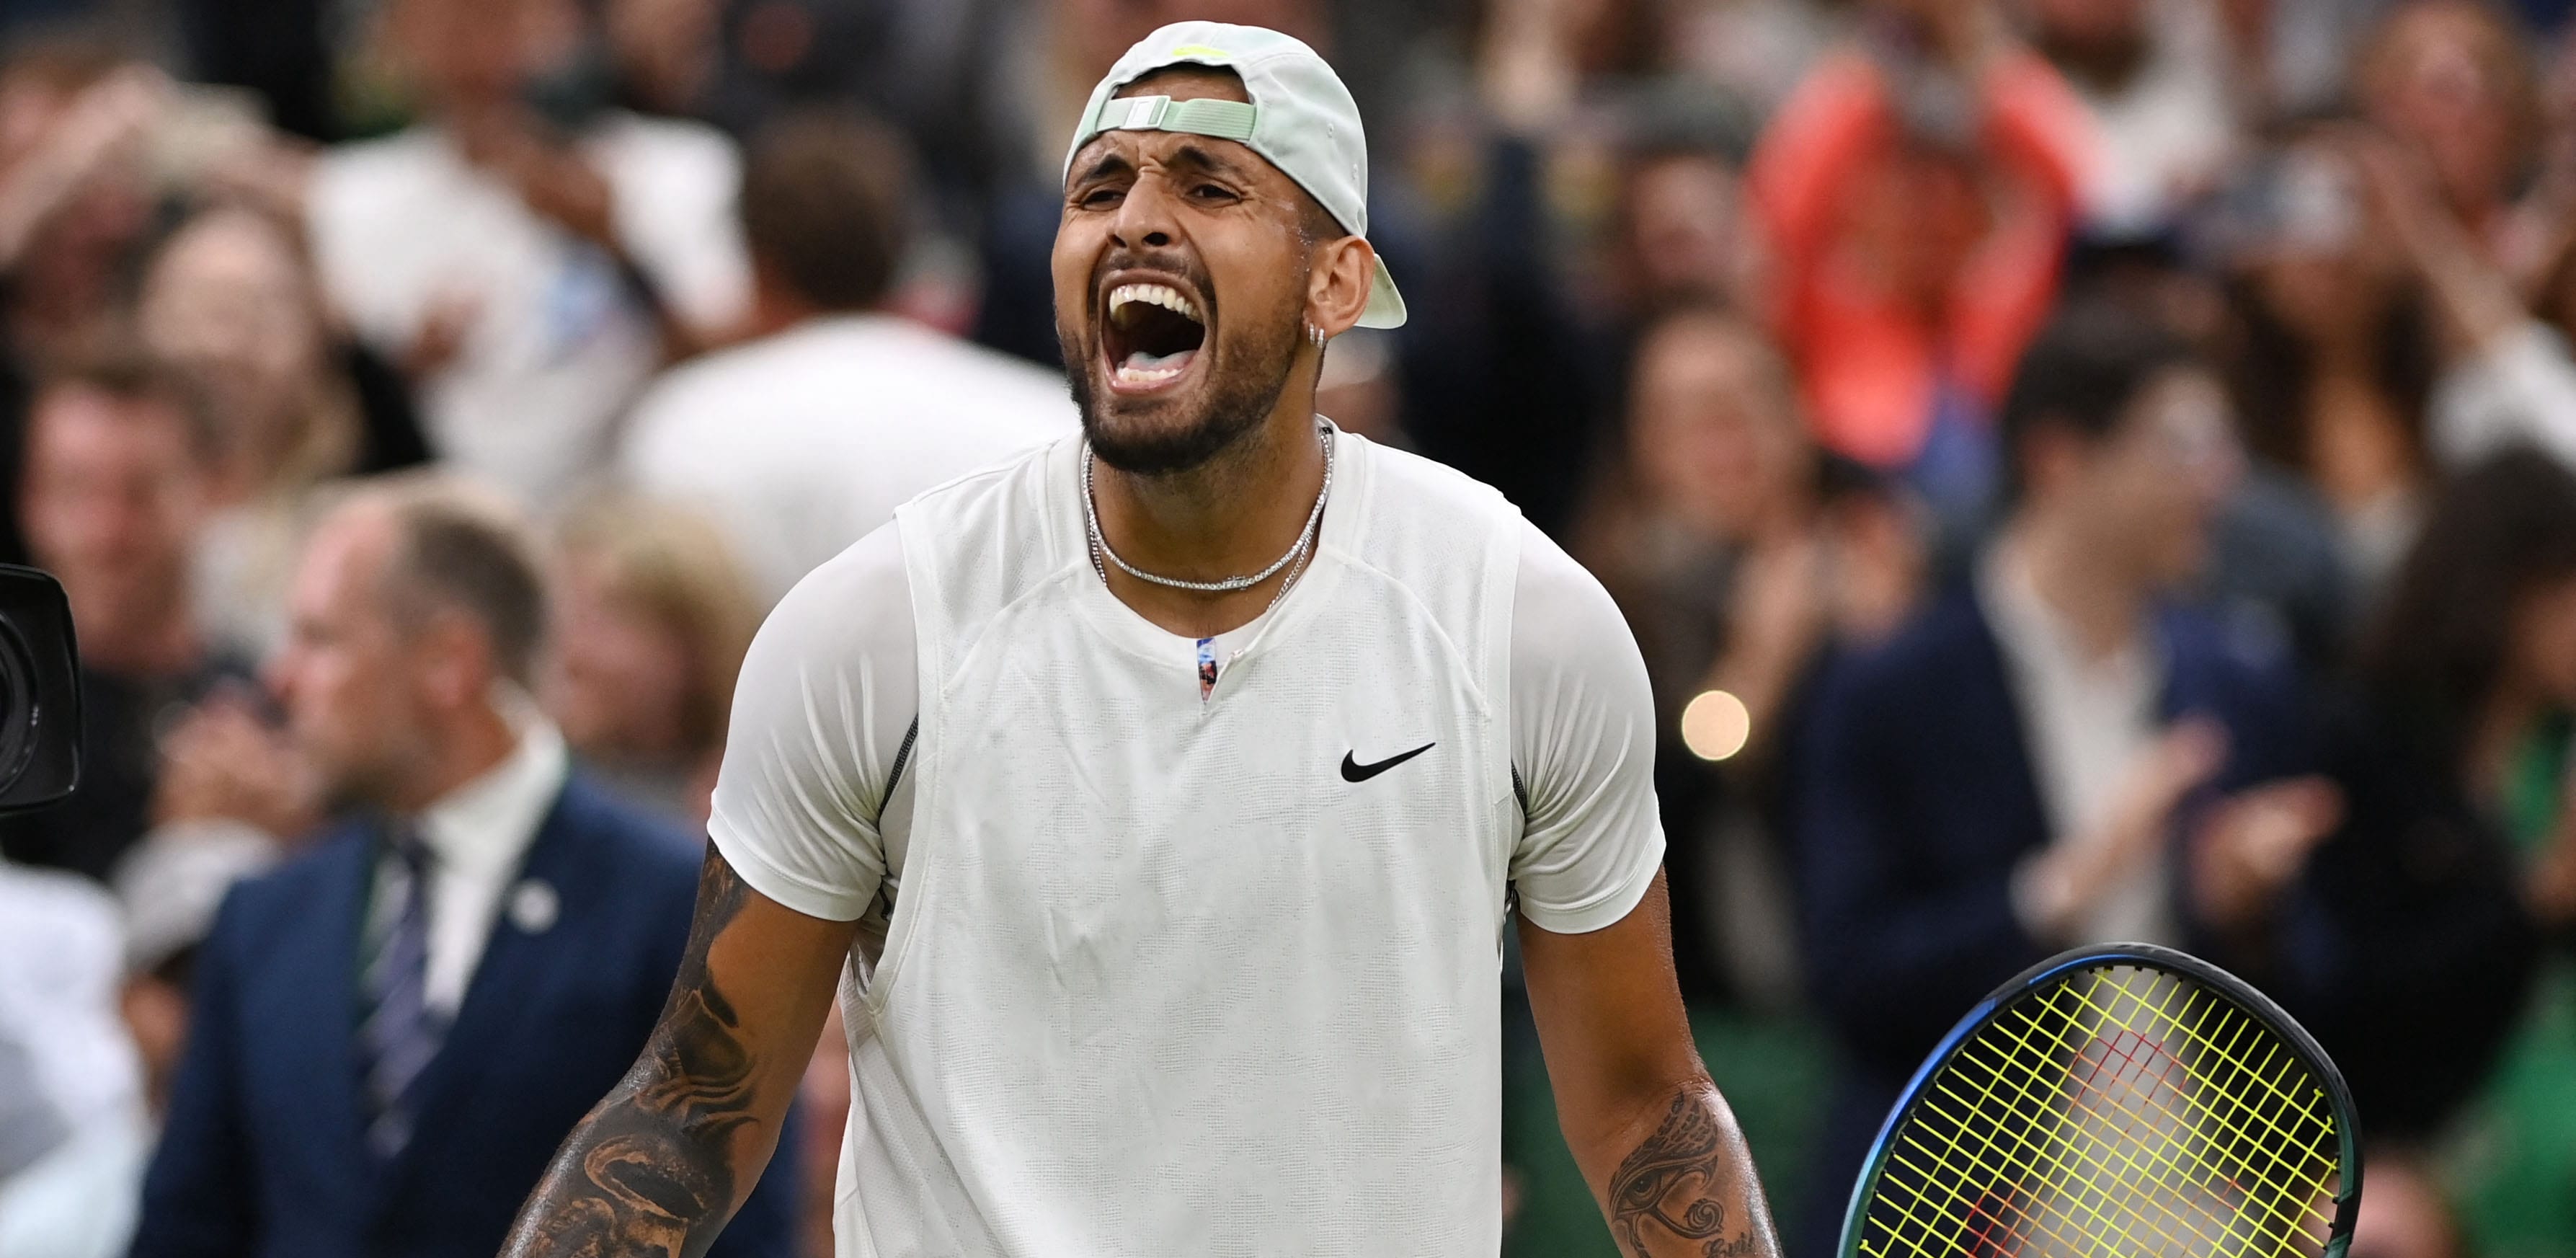 Quote(s) of the Day Nick Kyrgios sledges “soft” Stefanos Tsitsipas after Wimbledon bullying accusation